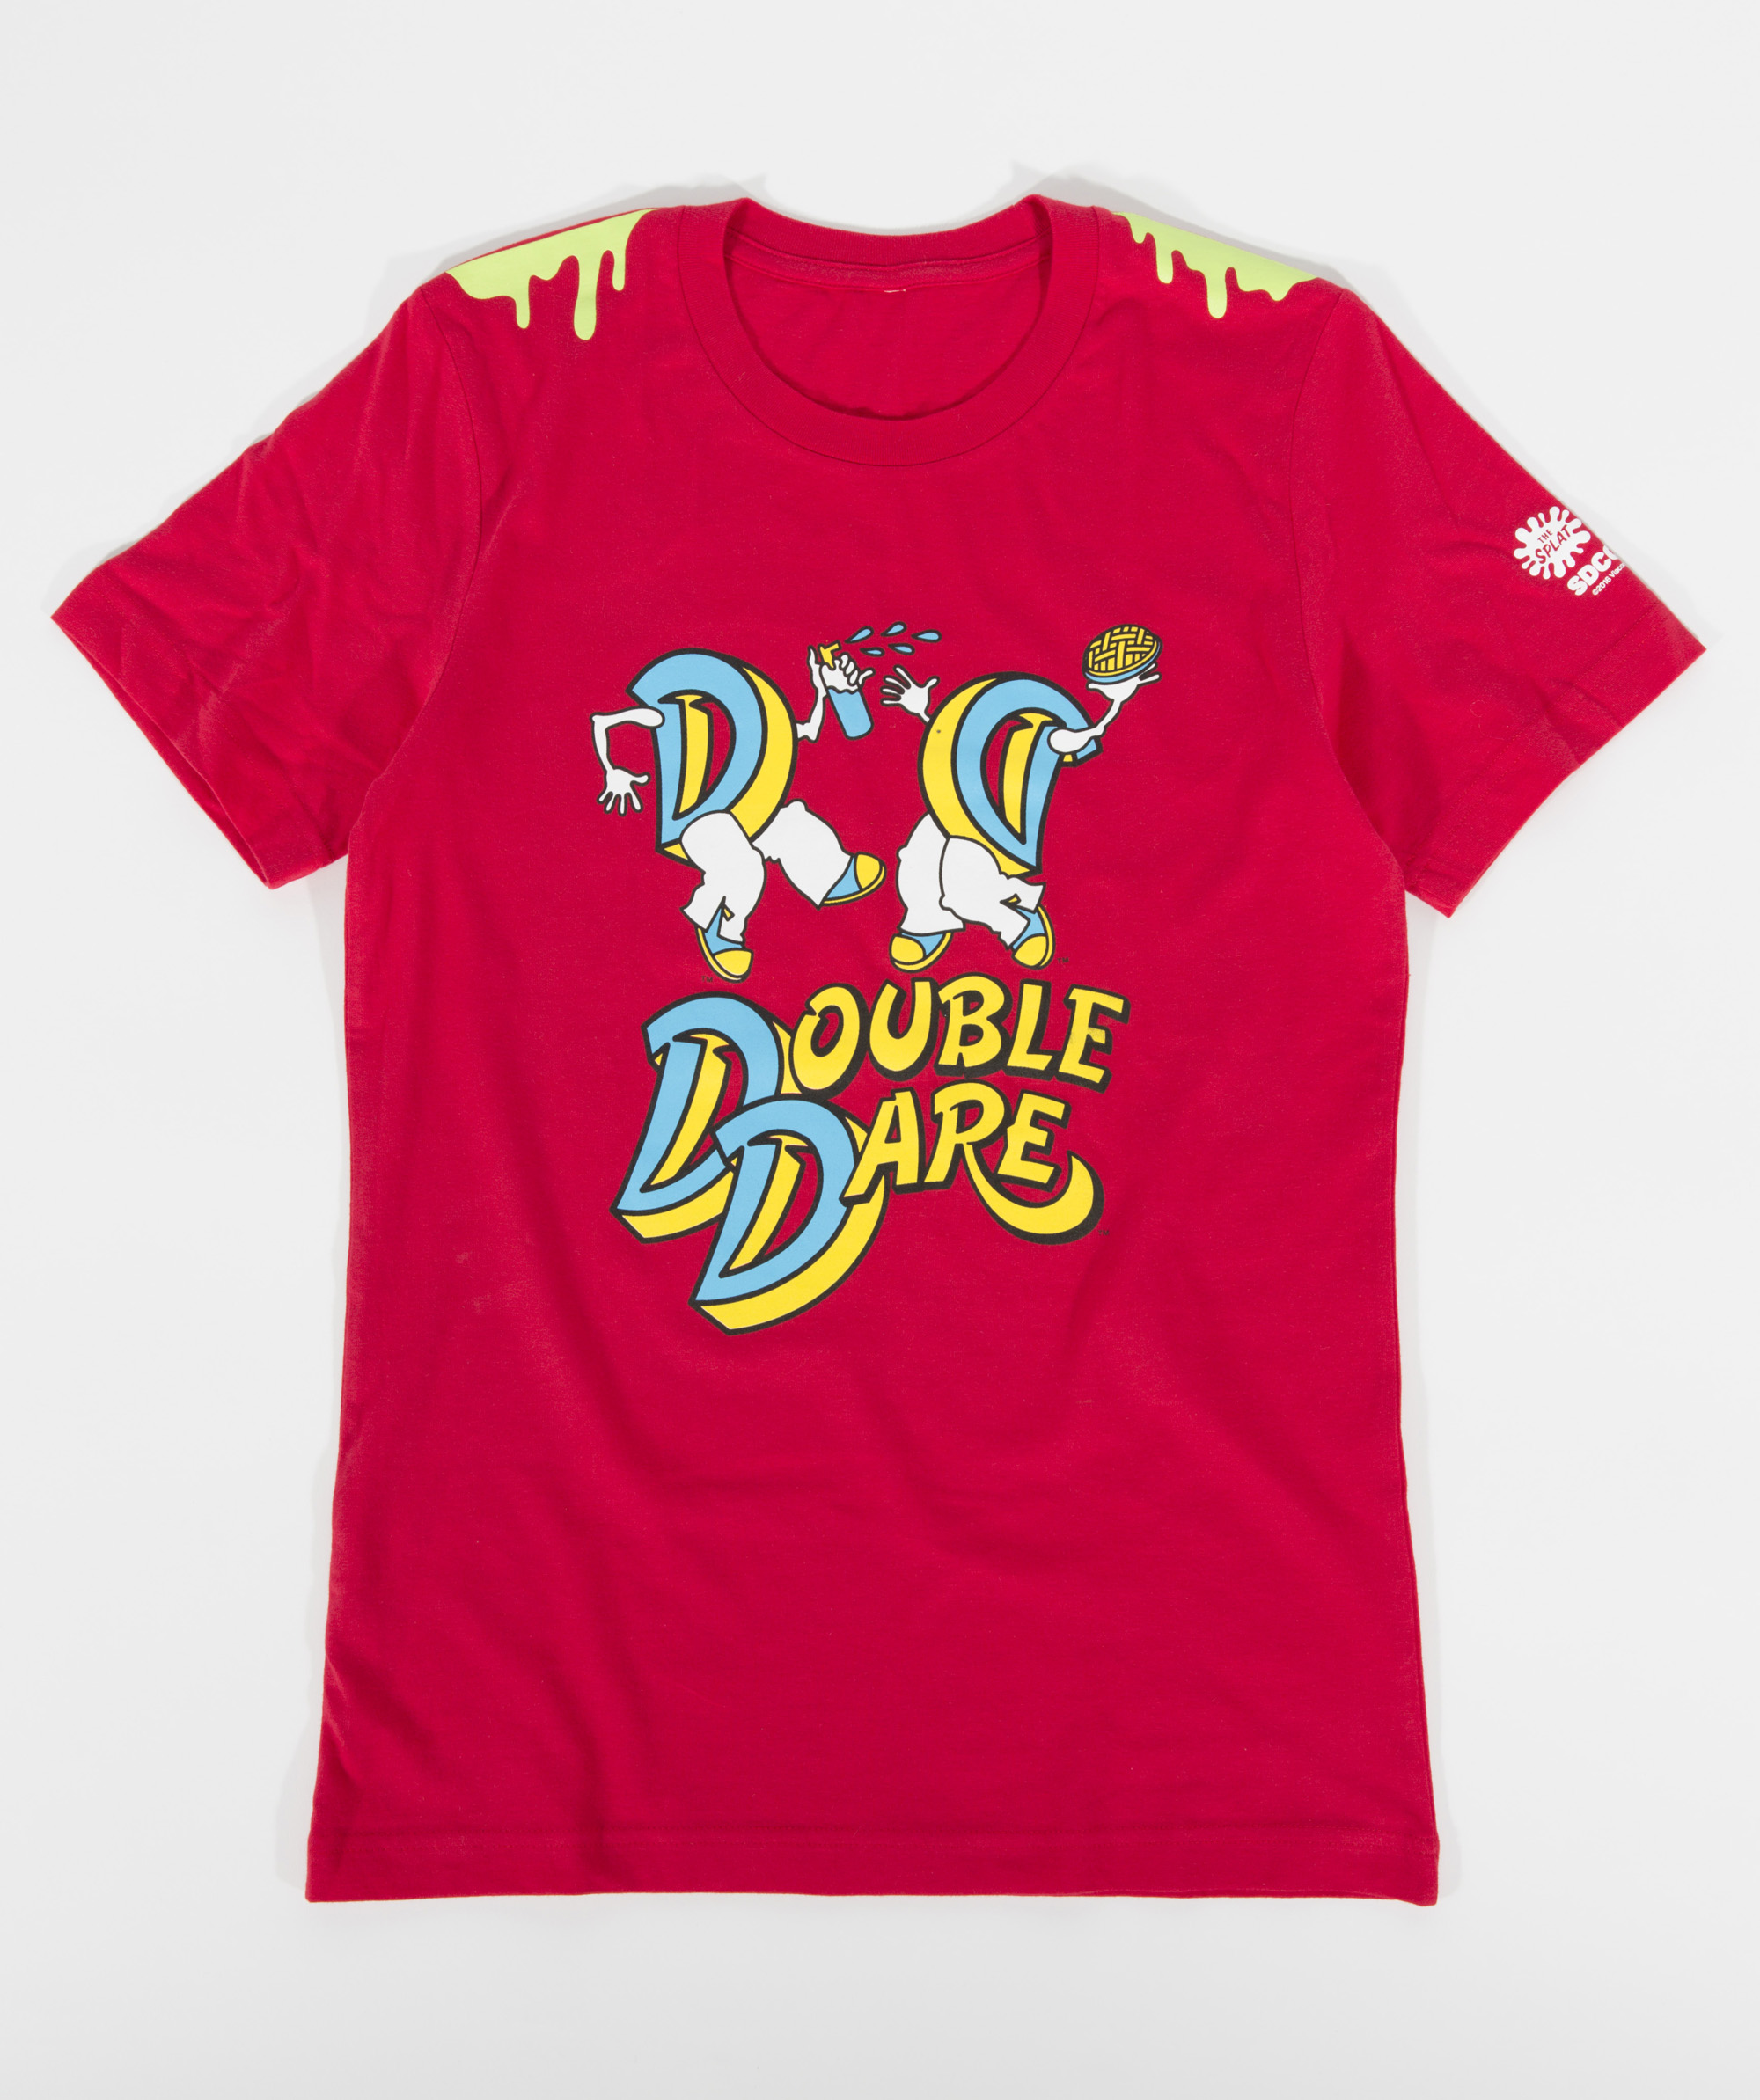 SDCC 2016_Nick_Double Dare Tshirt Red